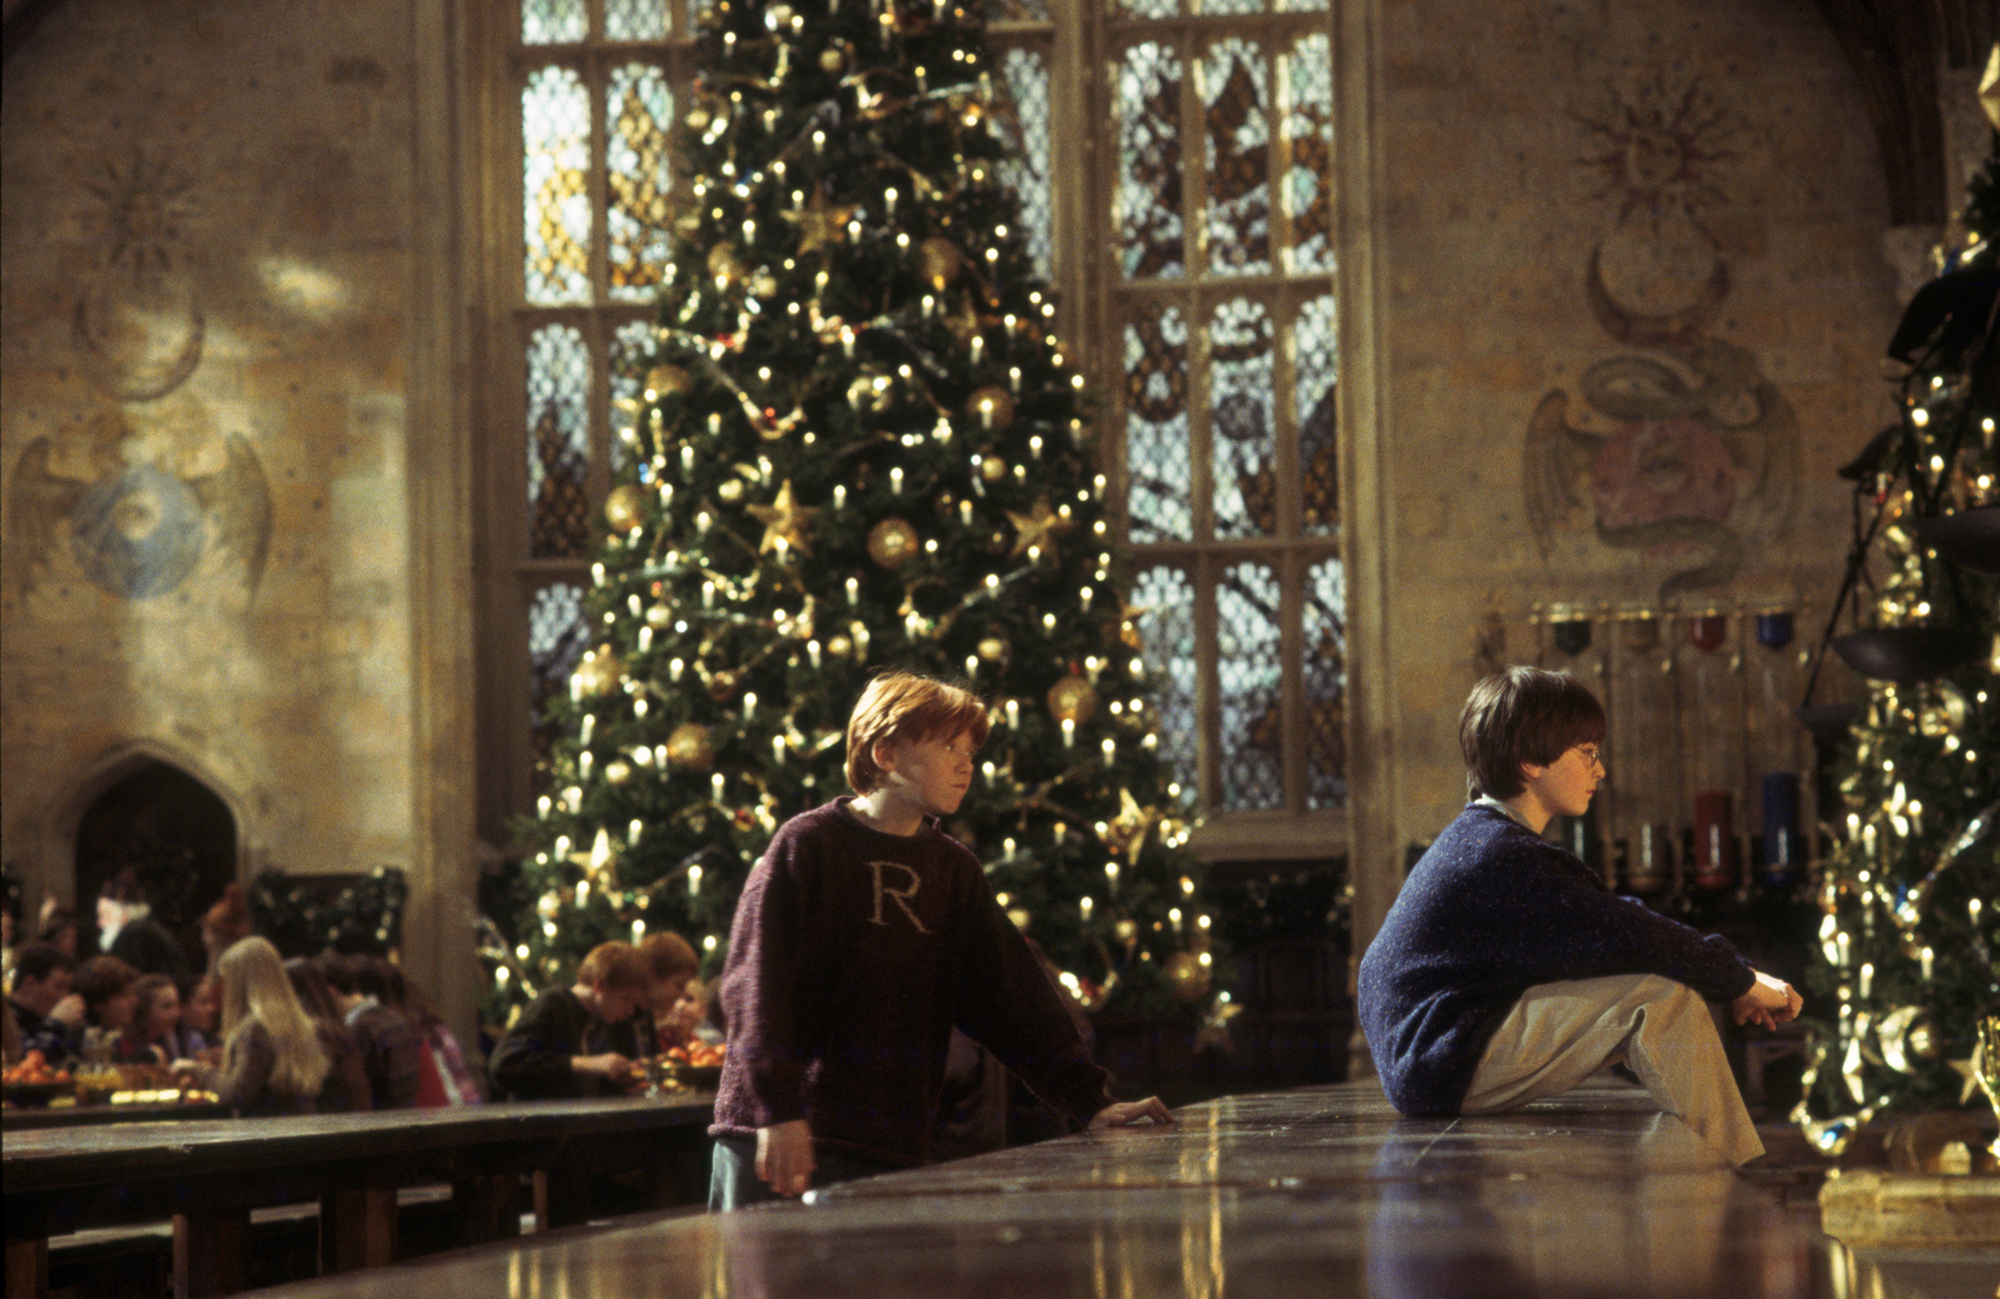 HP-F1-philosophers-stone-harry-ron-great-hall-christmas-weasley-jumpers-decorations-web-landscape